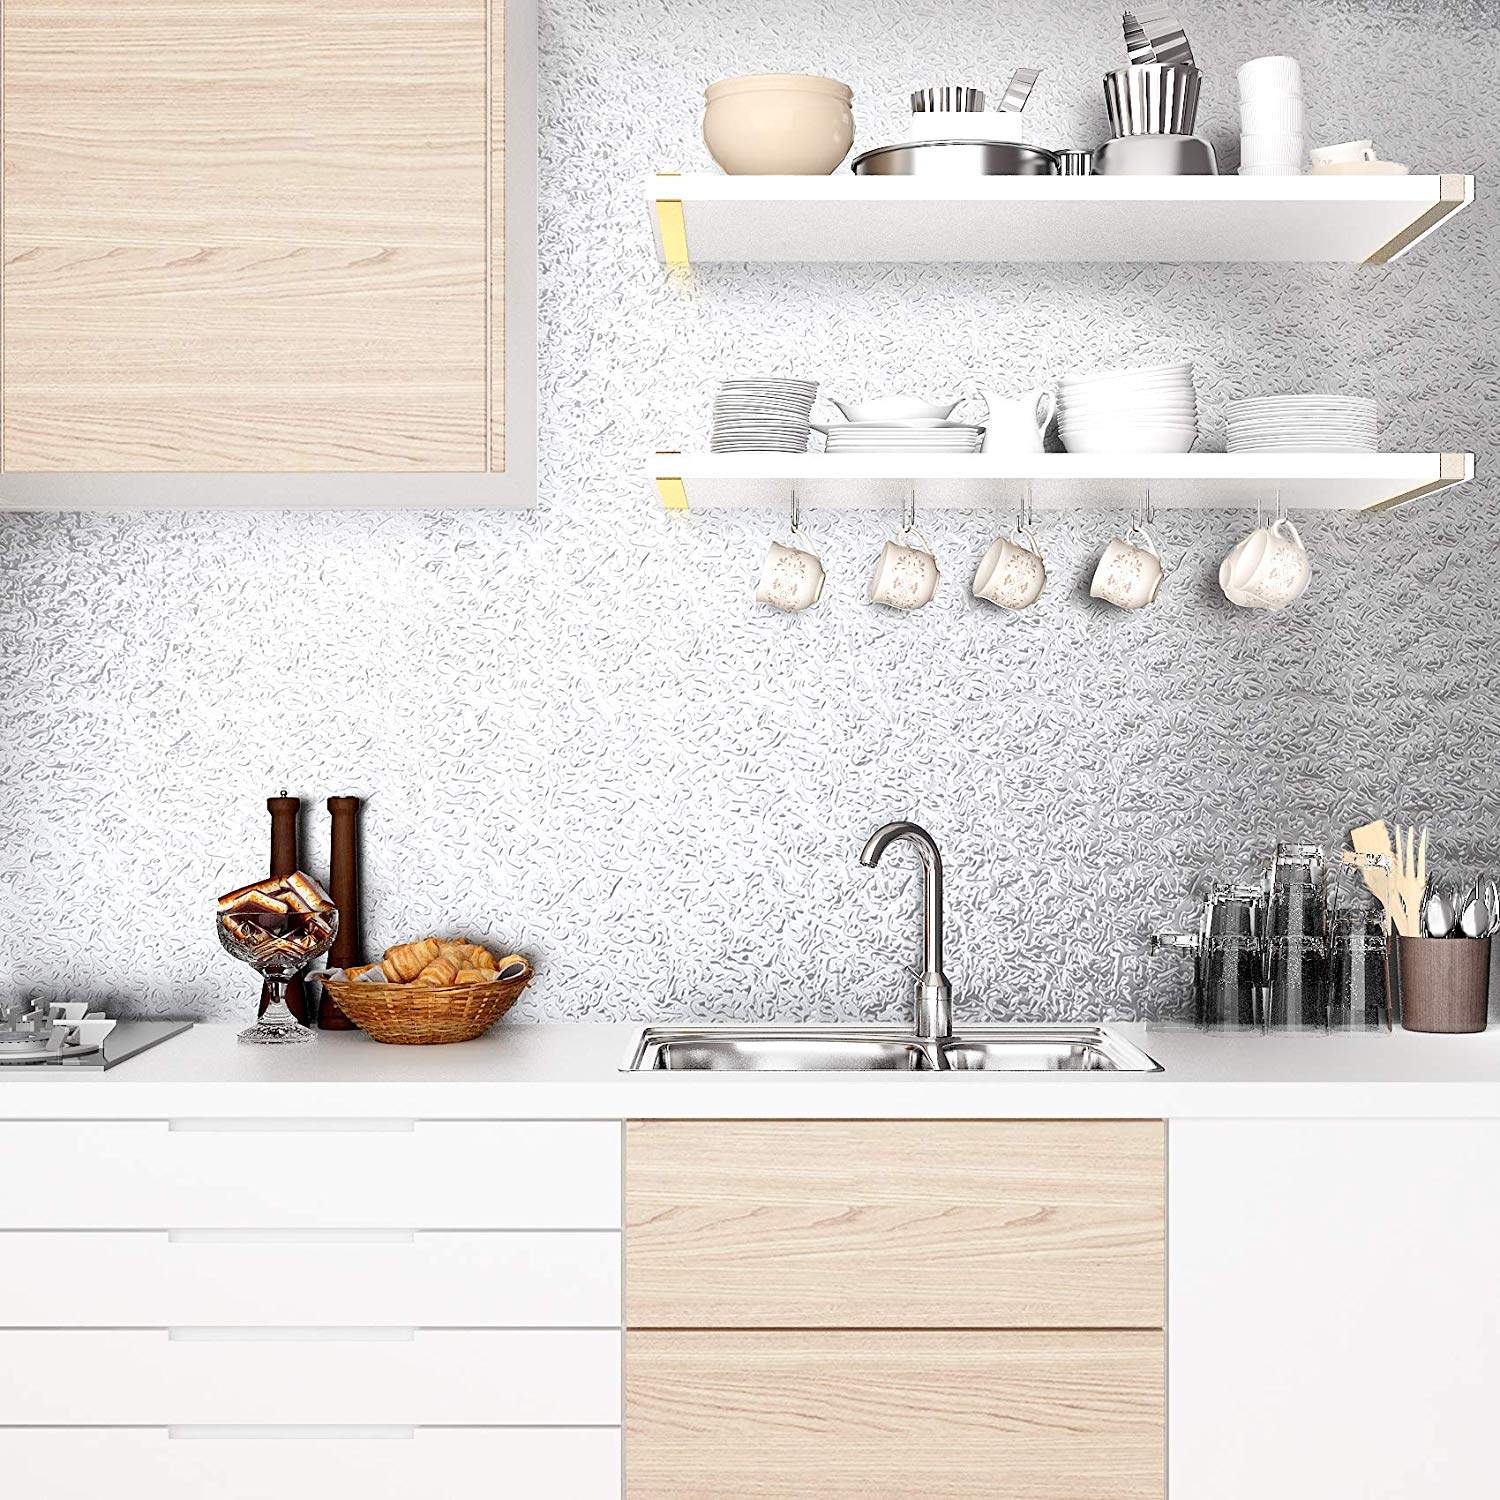 self-Adhesive Wallpapers Aluminium foil Sticker for Wall with Oil Proof Heat Resistant Stove Cabinet Stickers Kitchen backsplash Wall Tile Sticker